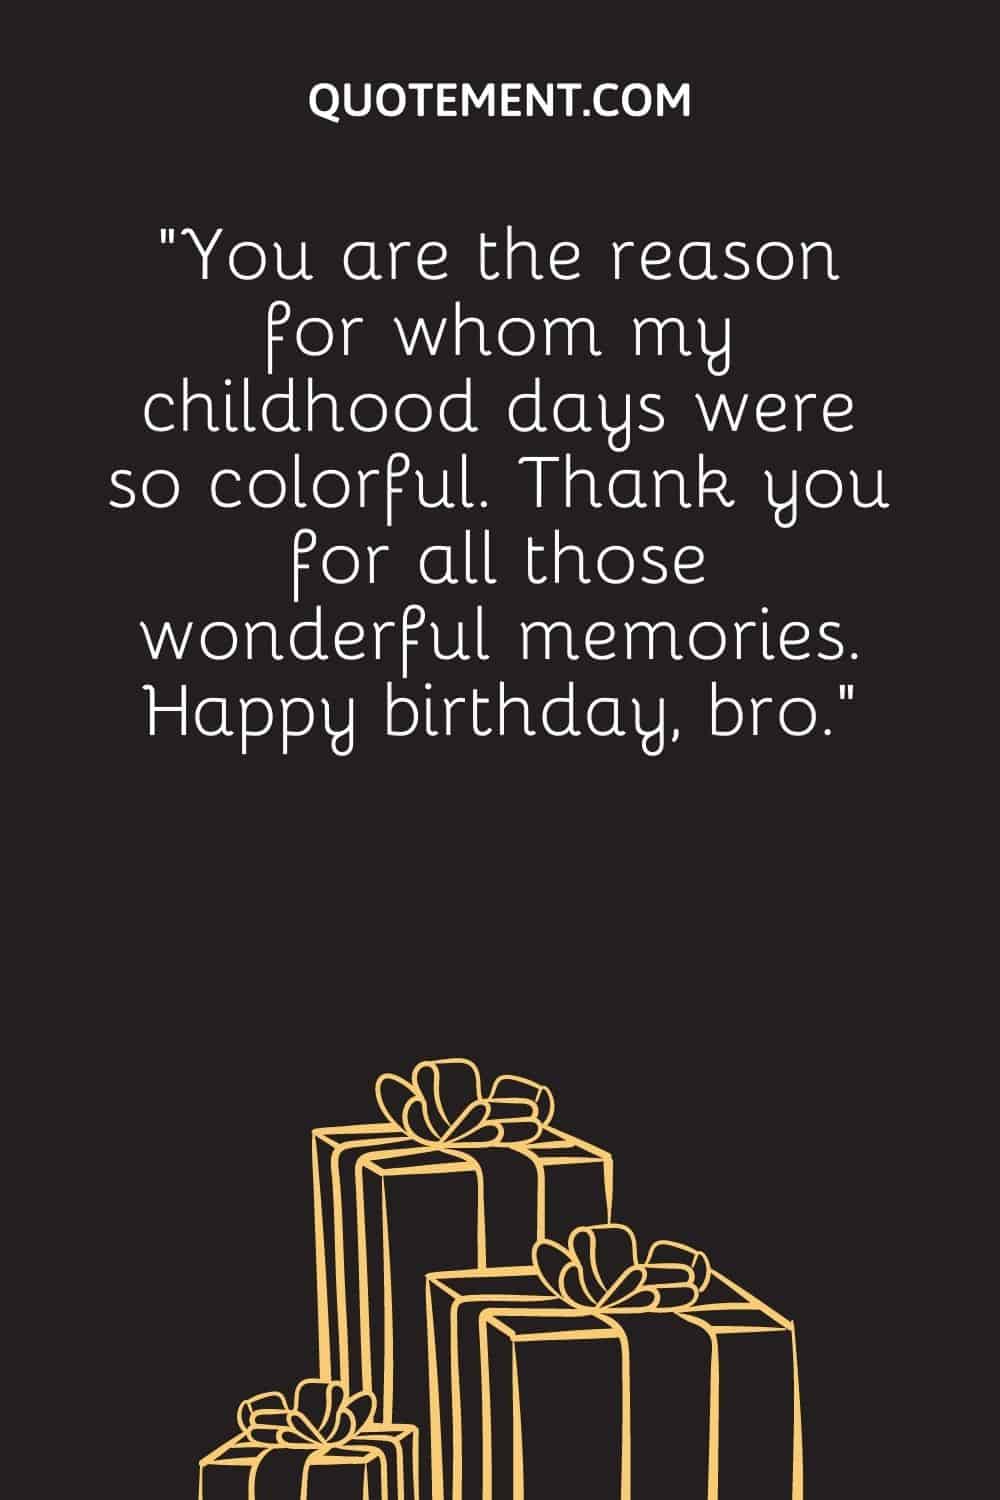 “You are the reason for whom my childhood days were so colorful. Thank you for all those wonderful memories. Happy birthday, bro.”